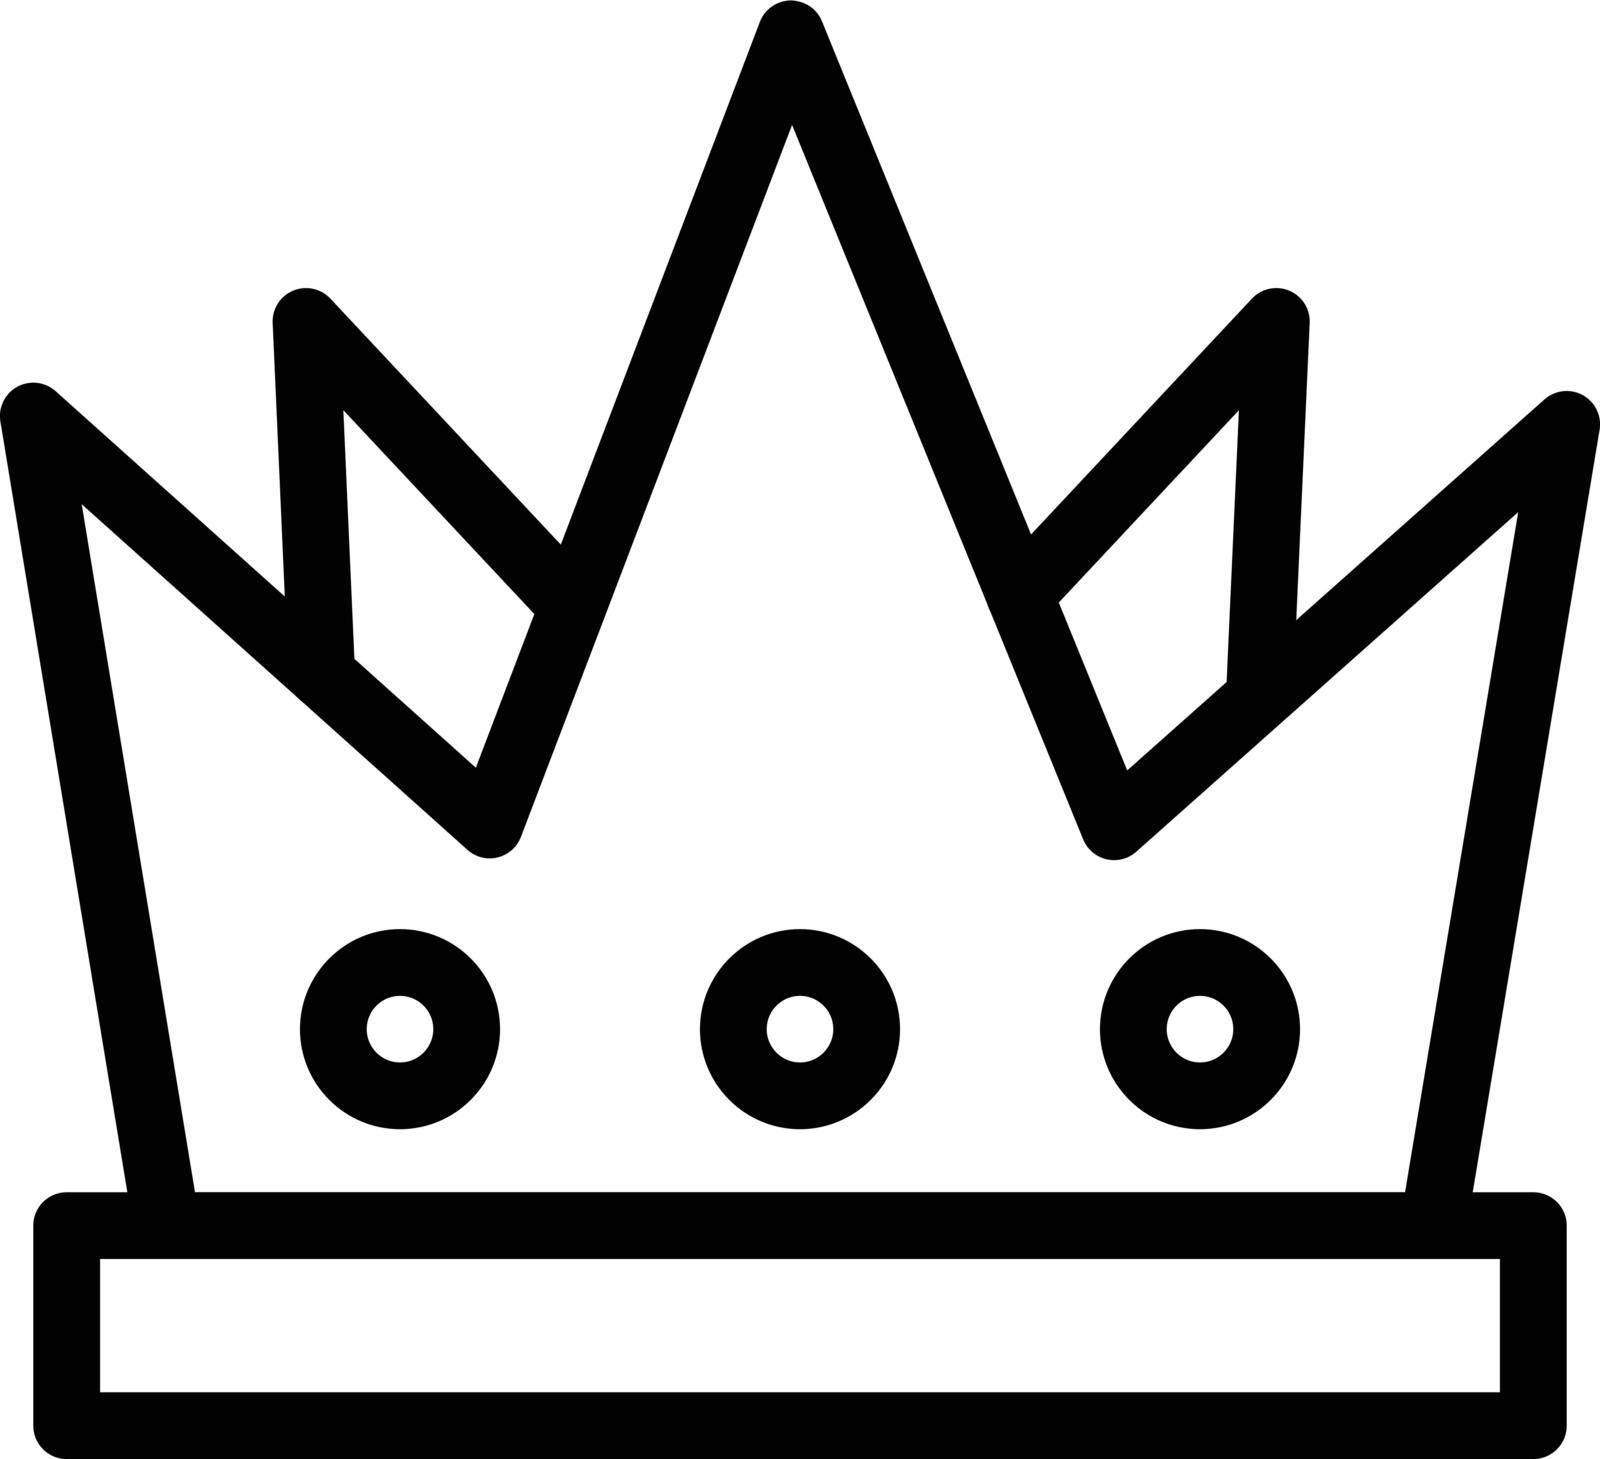 crown Vector illustration on a transparent background.Premium quality symbols.Thin line vector icon for concept and graphic design.